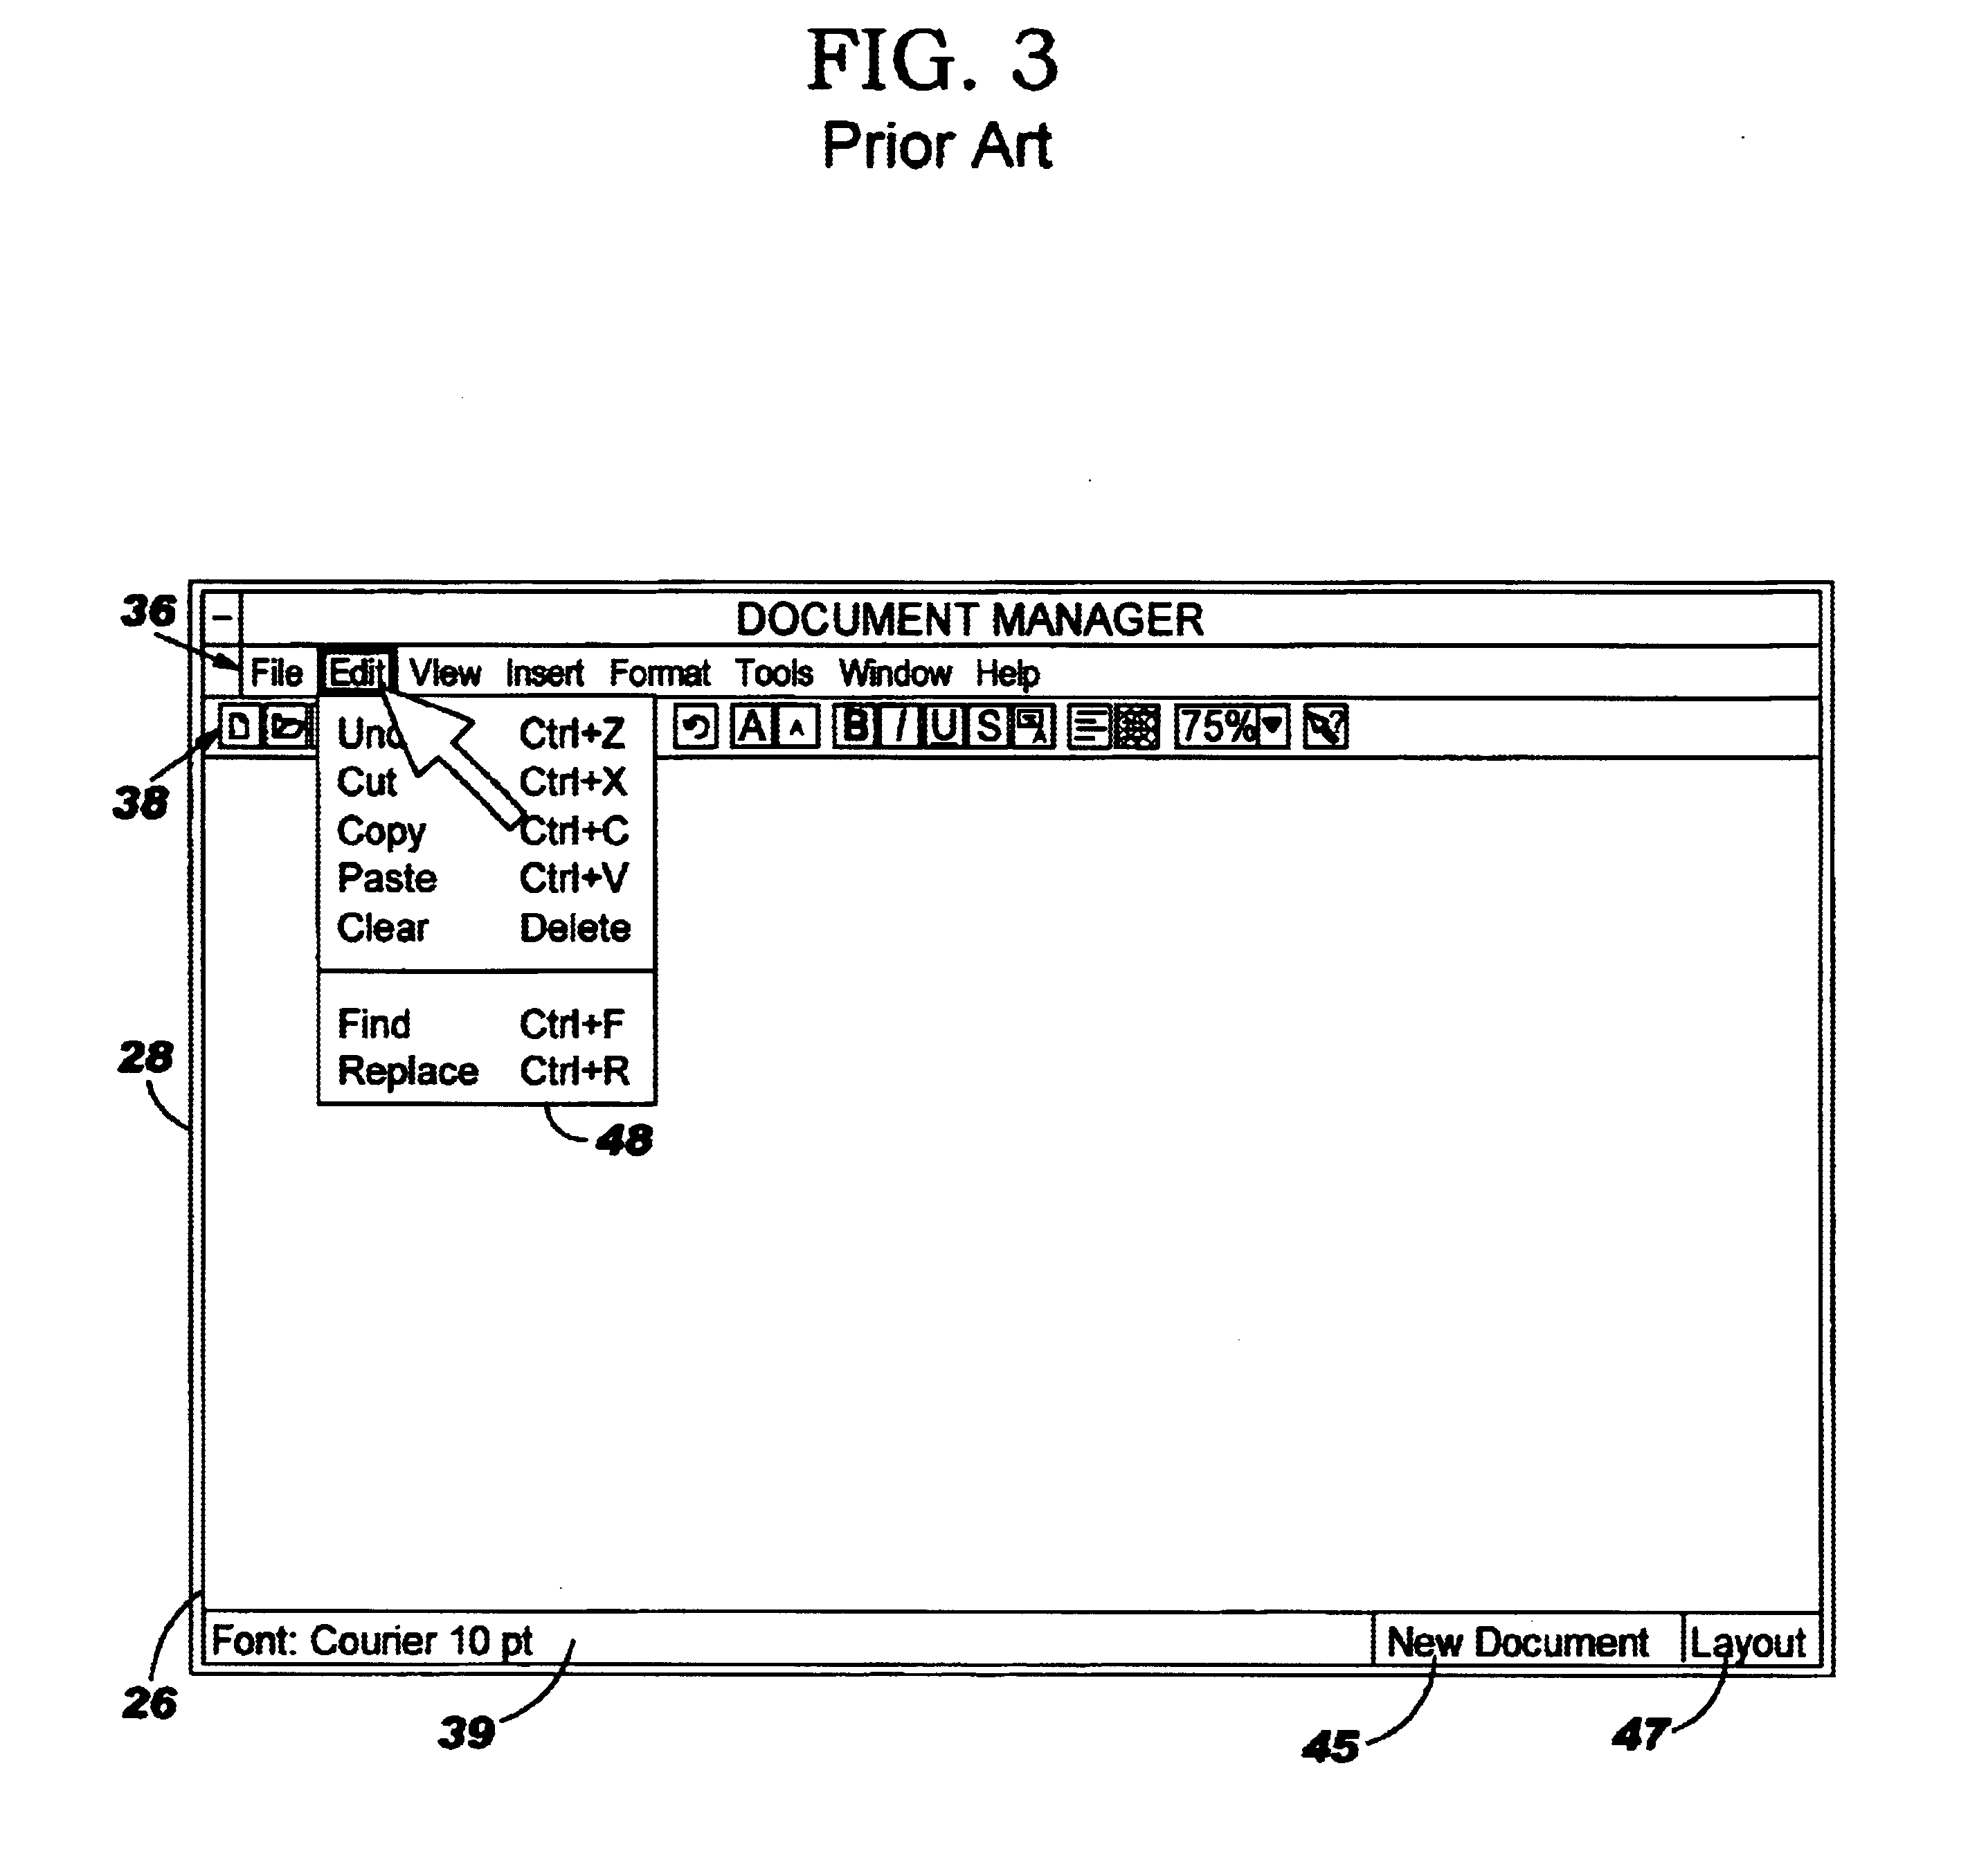 Flexible mouse-driven method of user interface